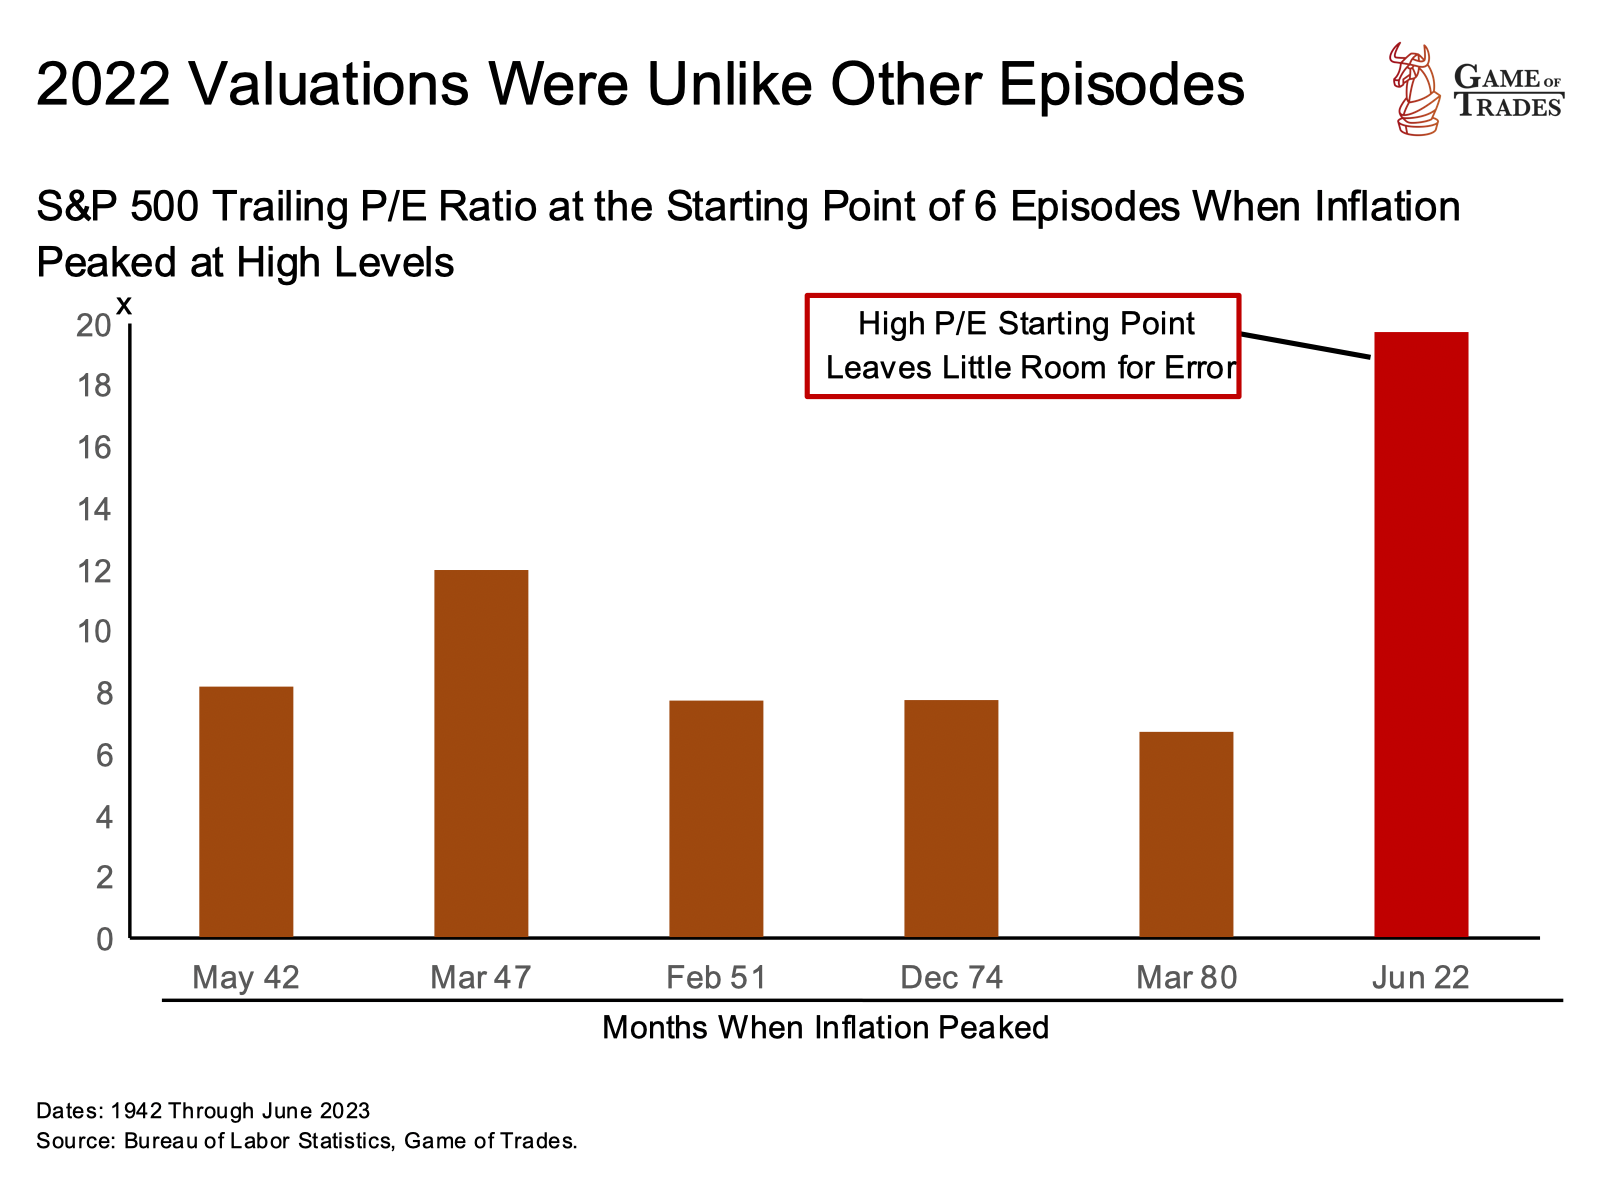 S&P 500 Valuations